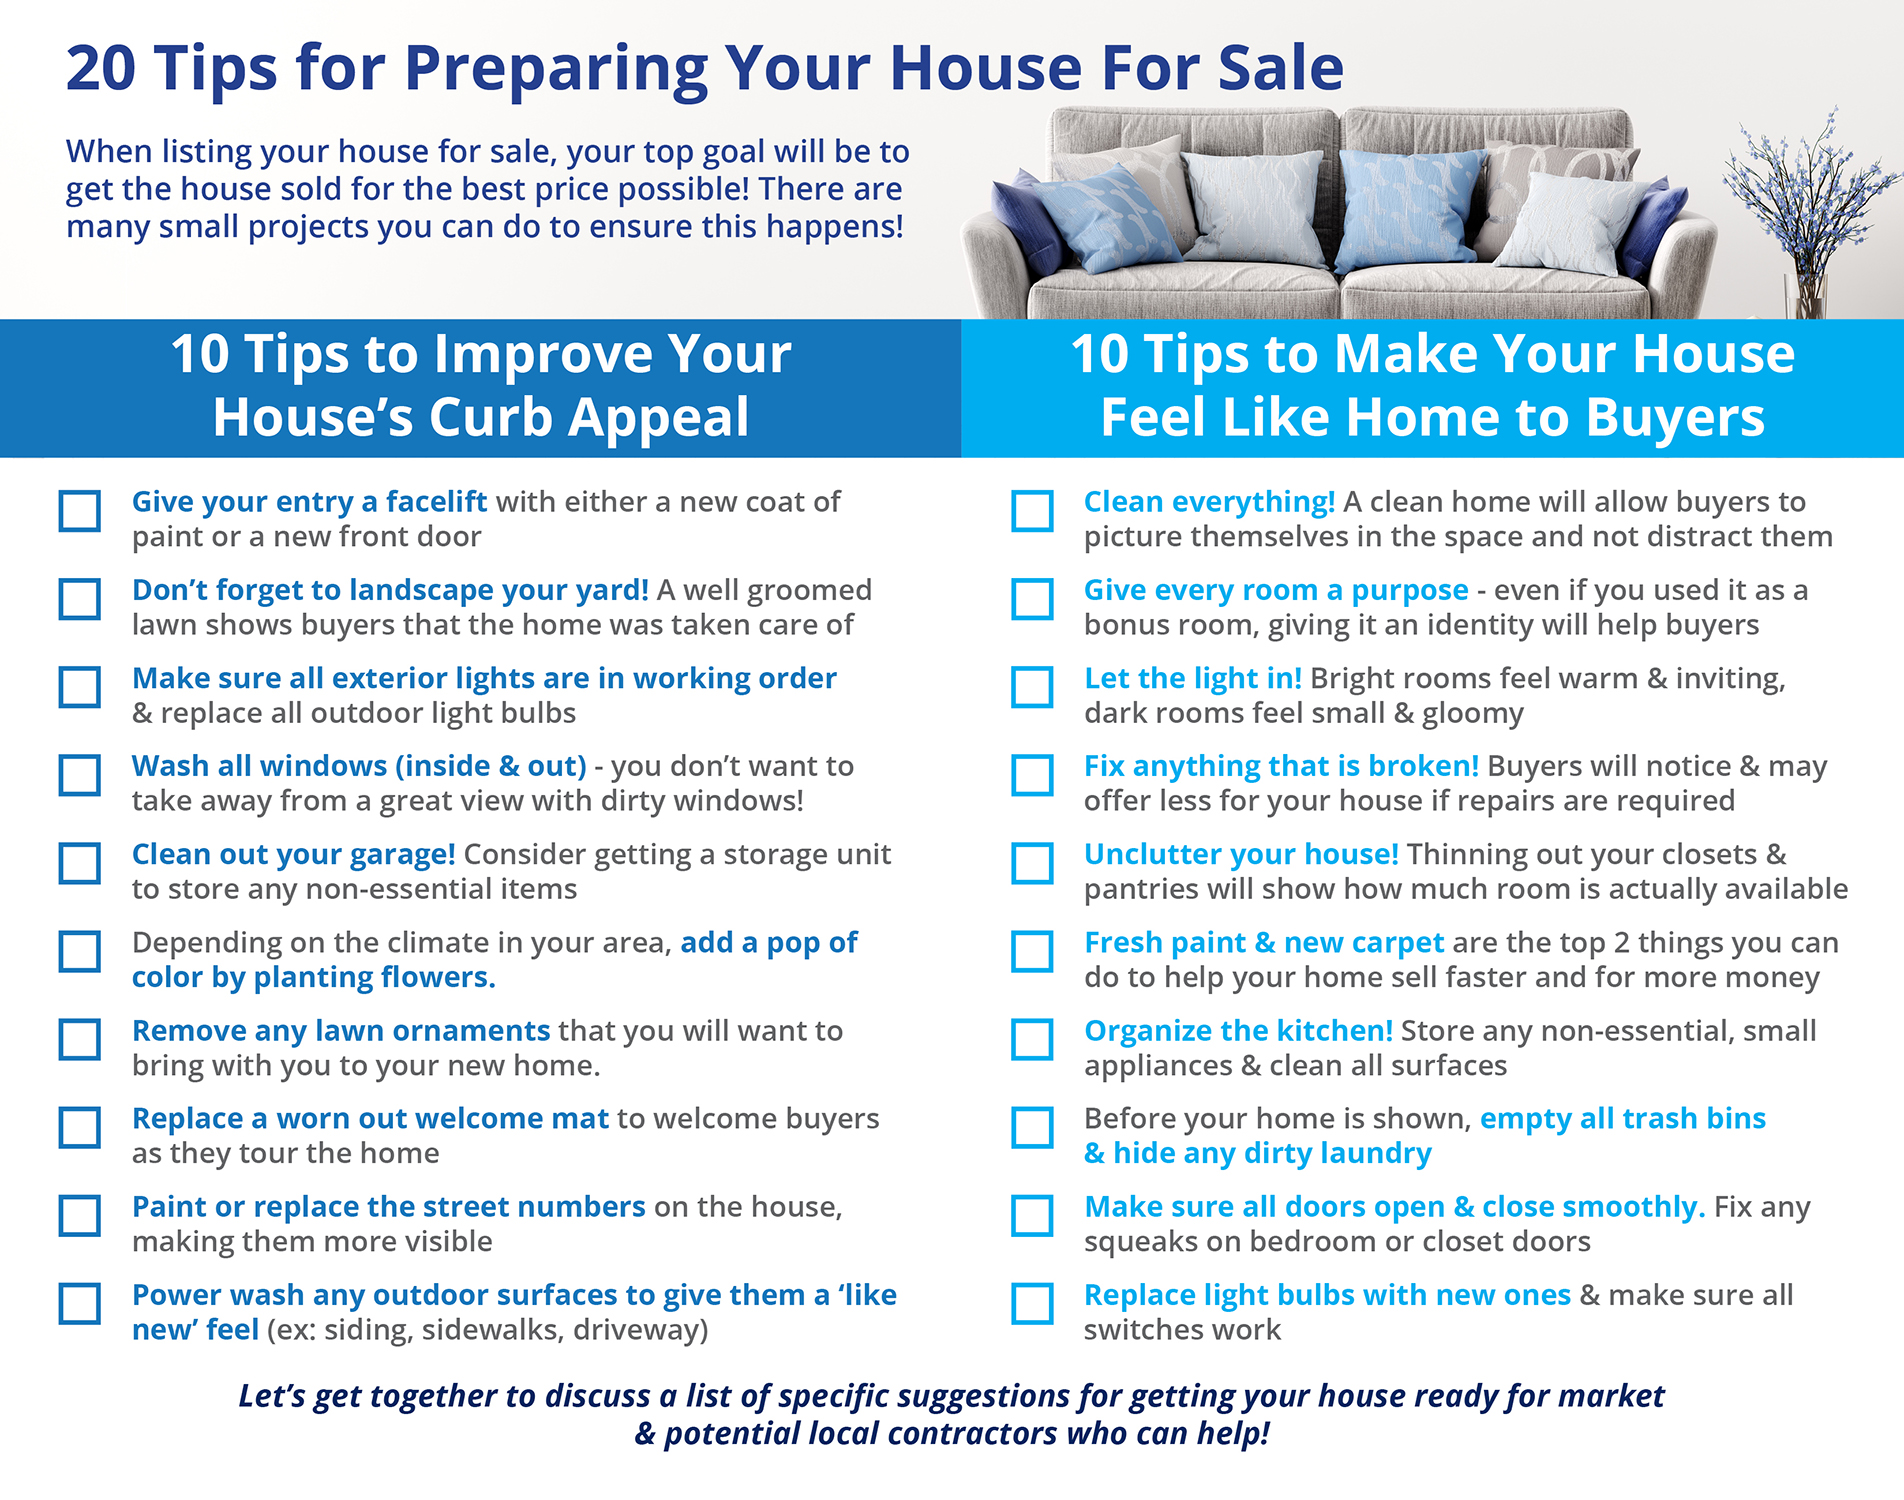 20 Tips for Preparing Your House for Sale This Spring [INFOGRAPHIC] | MyKCM